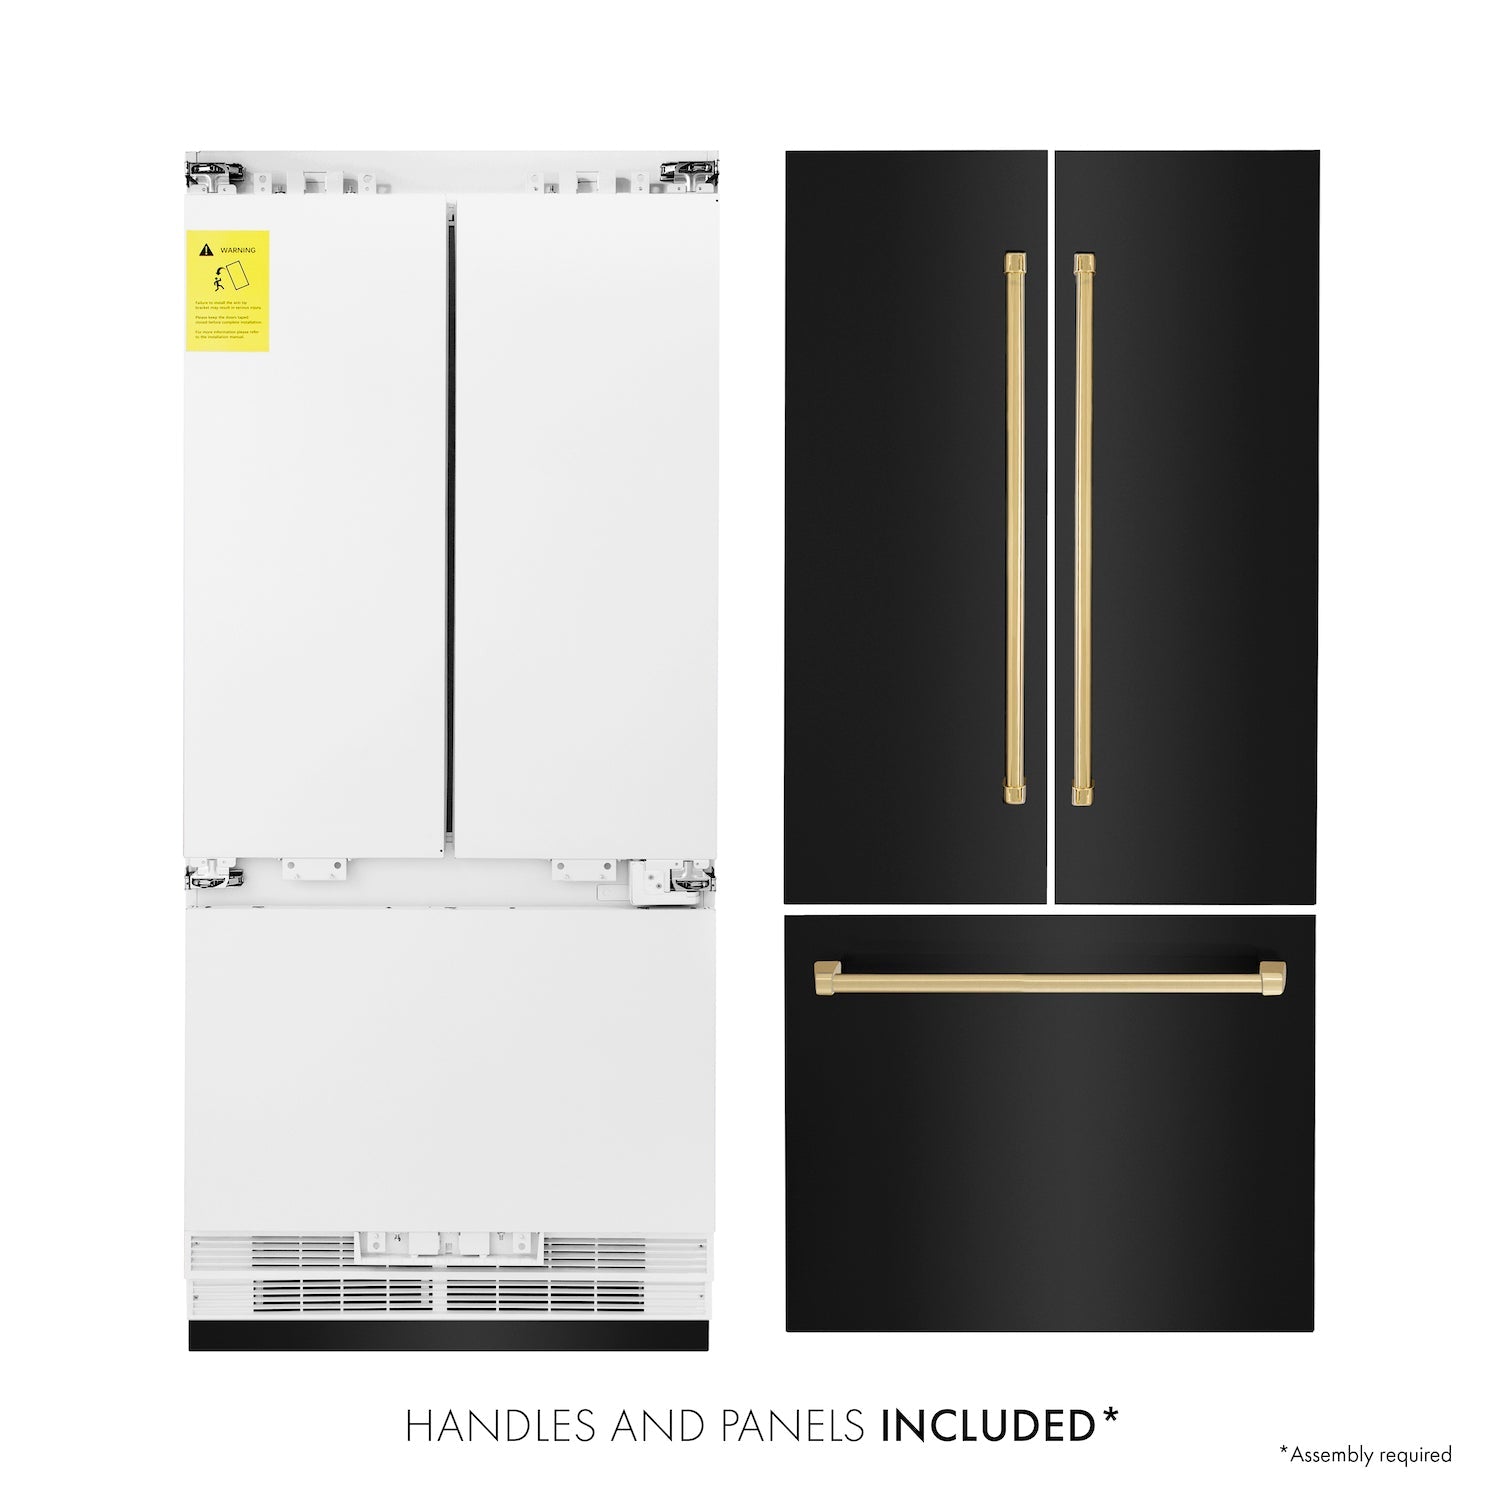 ZLINE 36" Autograph Edition Built-in 2-Door Bottom Freezer Refrigerator - Black Stainless Steel with Polished Gold Accents, Internal Water and Ice Dispenser